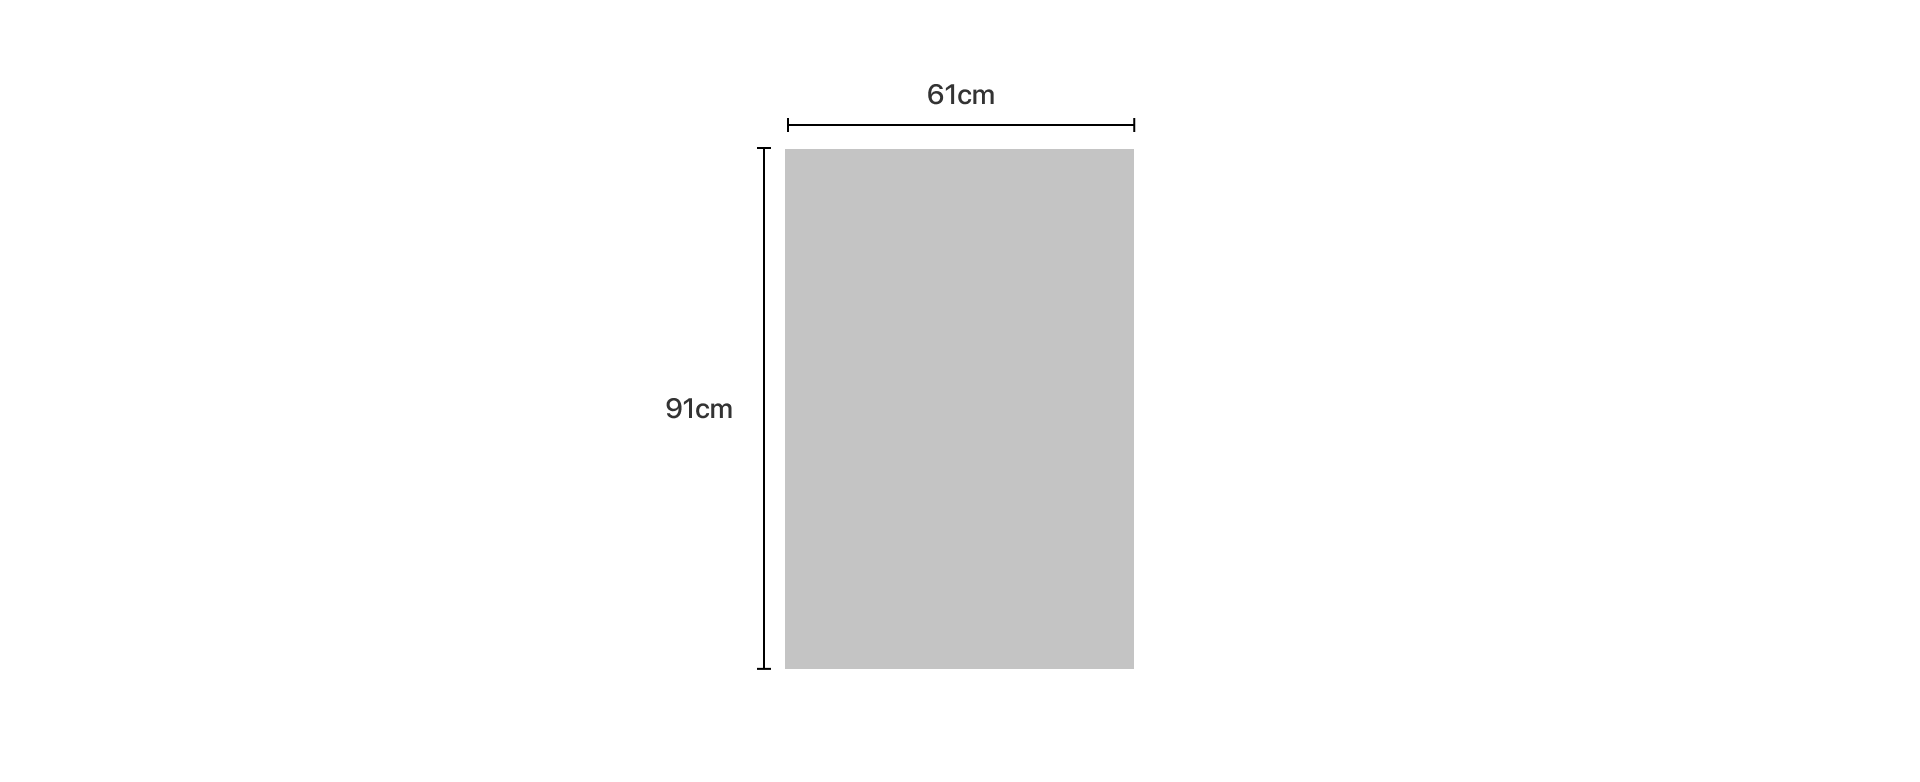 Simple graphic of a rectangle with dimensions 61cm by 91cm